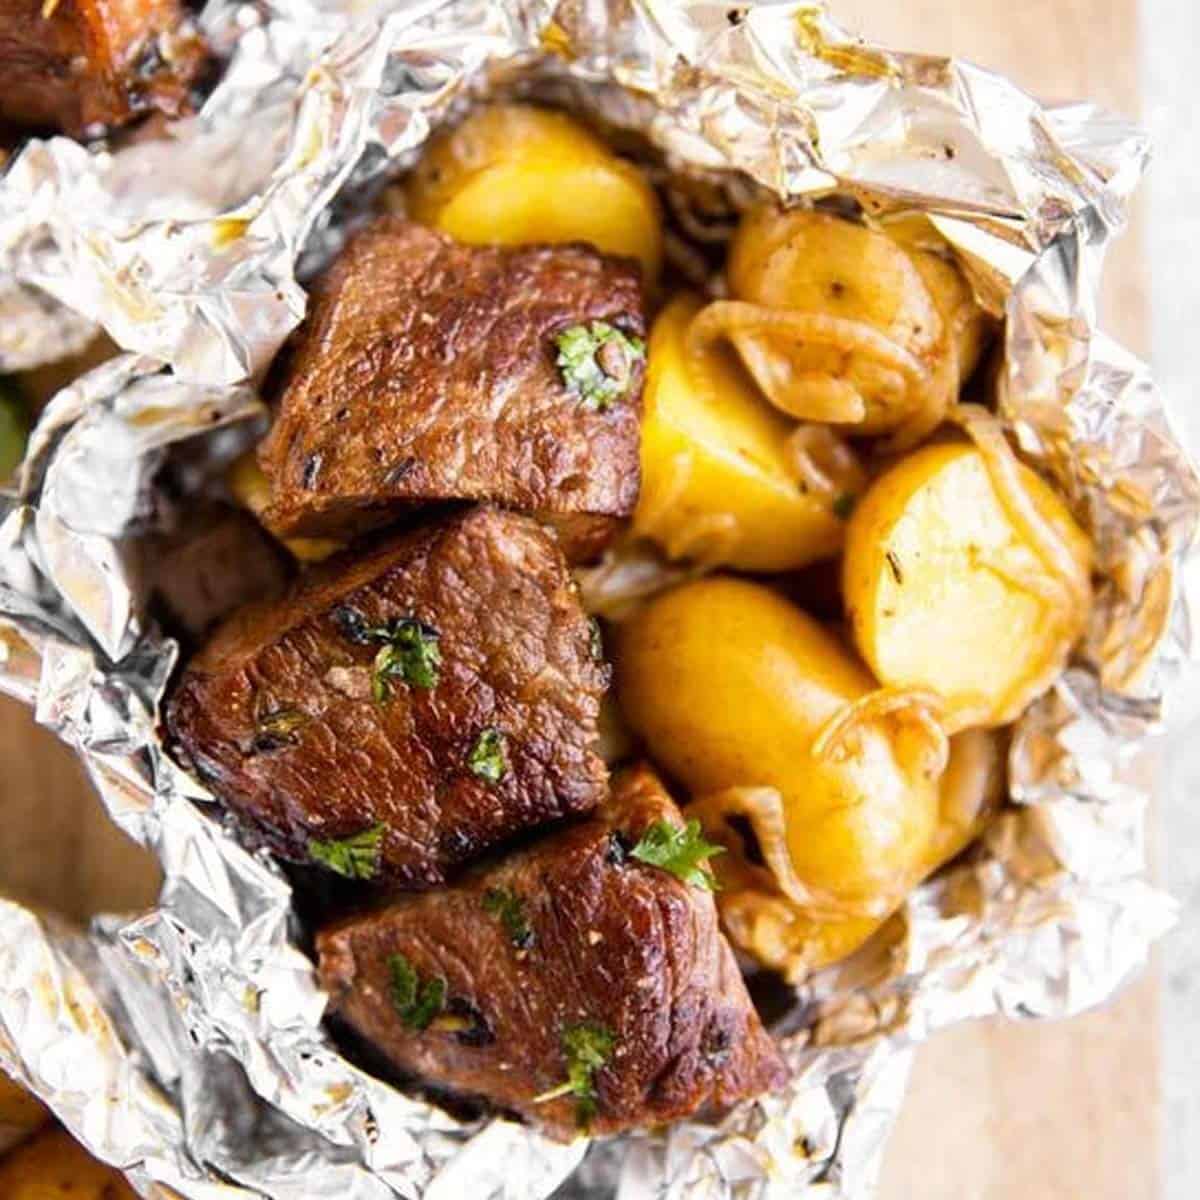 https://www.savorynothings.com/wp-content/uploads/2021/04/steak-and-potato-foil-packets-image-sq.jpg